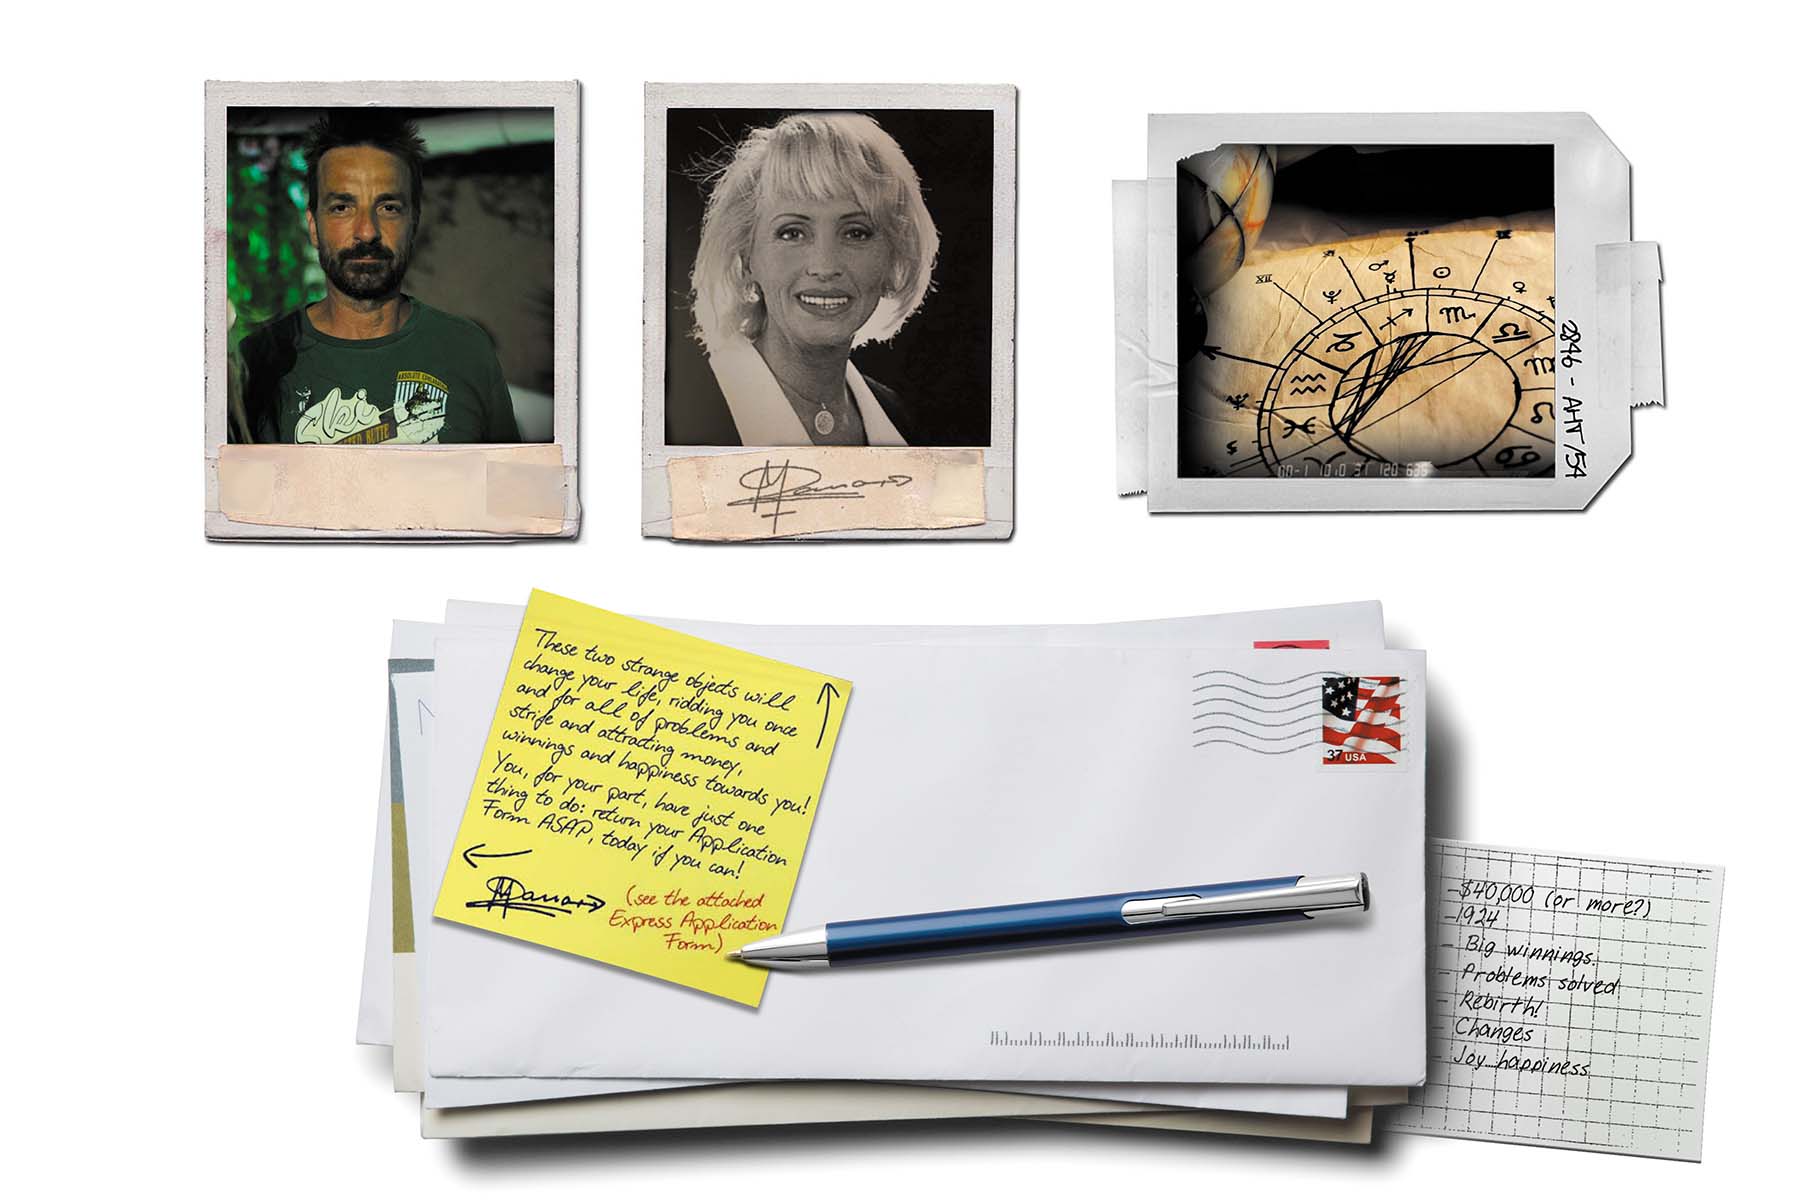 A photo illustration of a flat lay image consisting of a Polaroid picture of Patrice Runner, another Polaroid picture of Maria Duval, an image of an astrological birth chart, and stack of mail and handwritten notes.